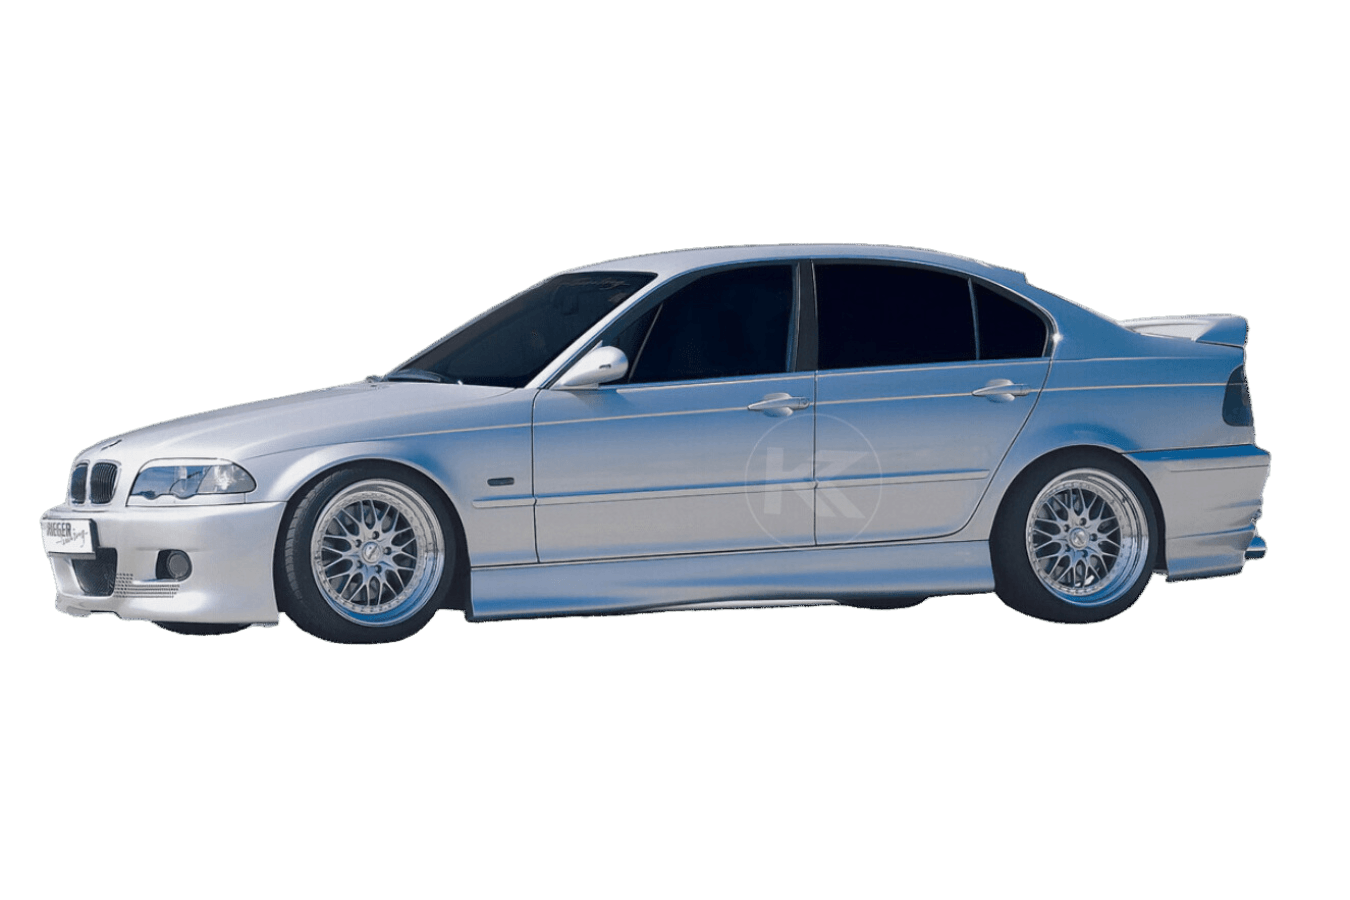 BMW E46 Sedan/Compact/Touring - Rieger "Twisty" Side Skirts - K2 Industries